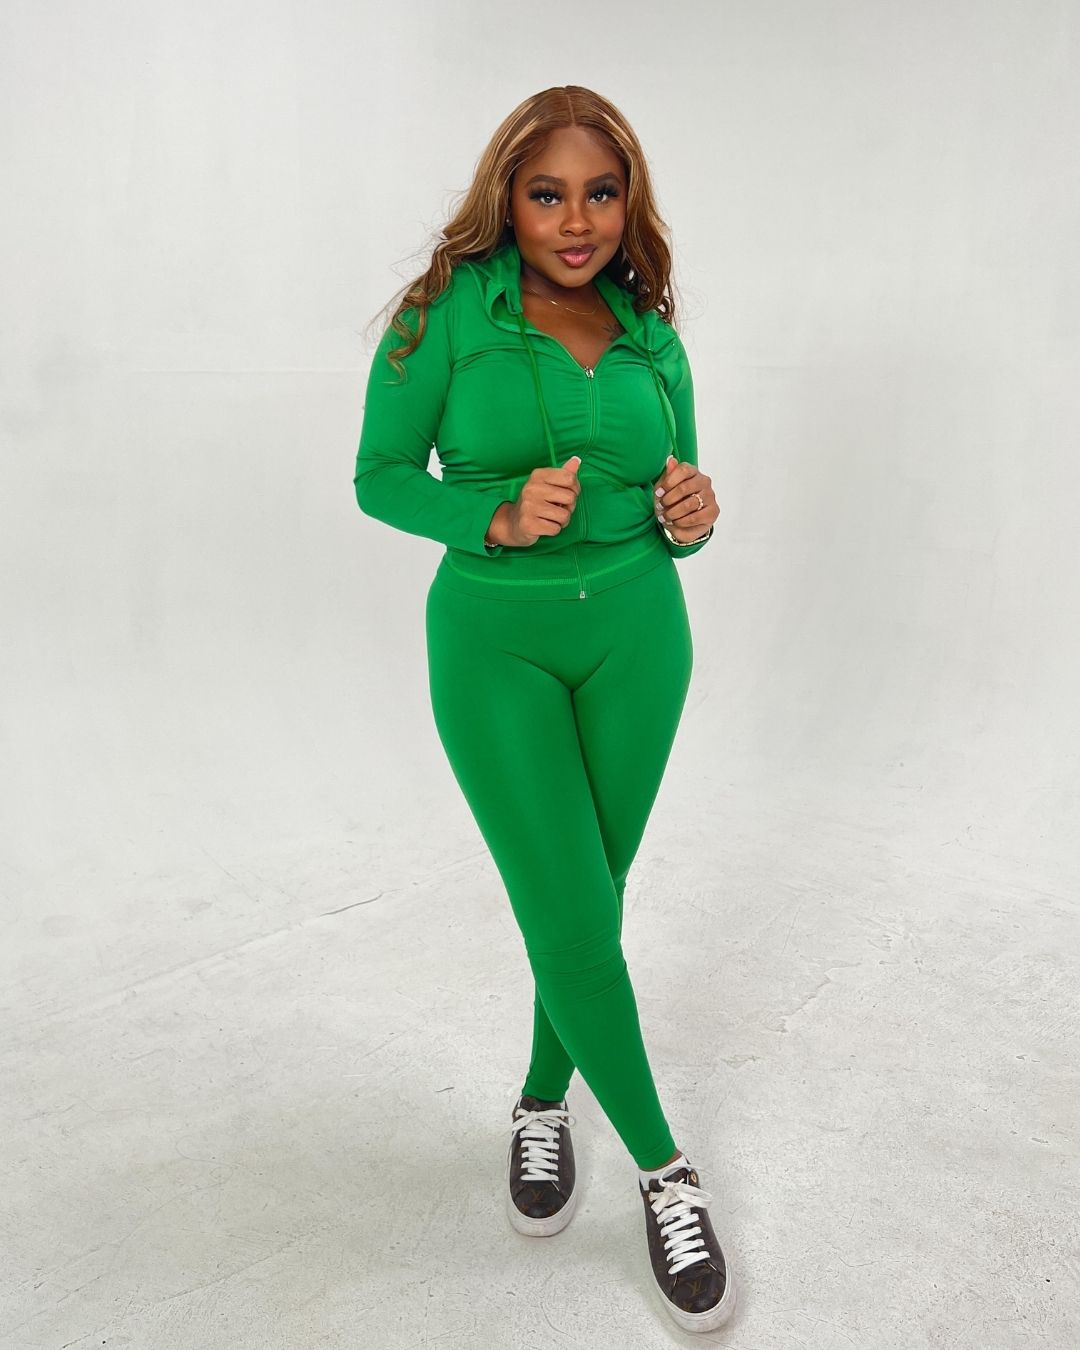 Out & About 2-Piece Legging Set (Kelly Green) - INDIVIDUAL SALE